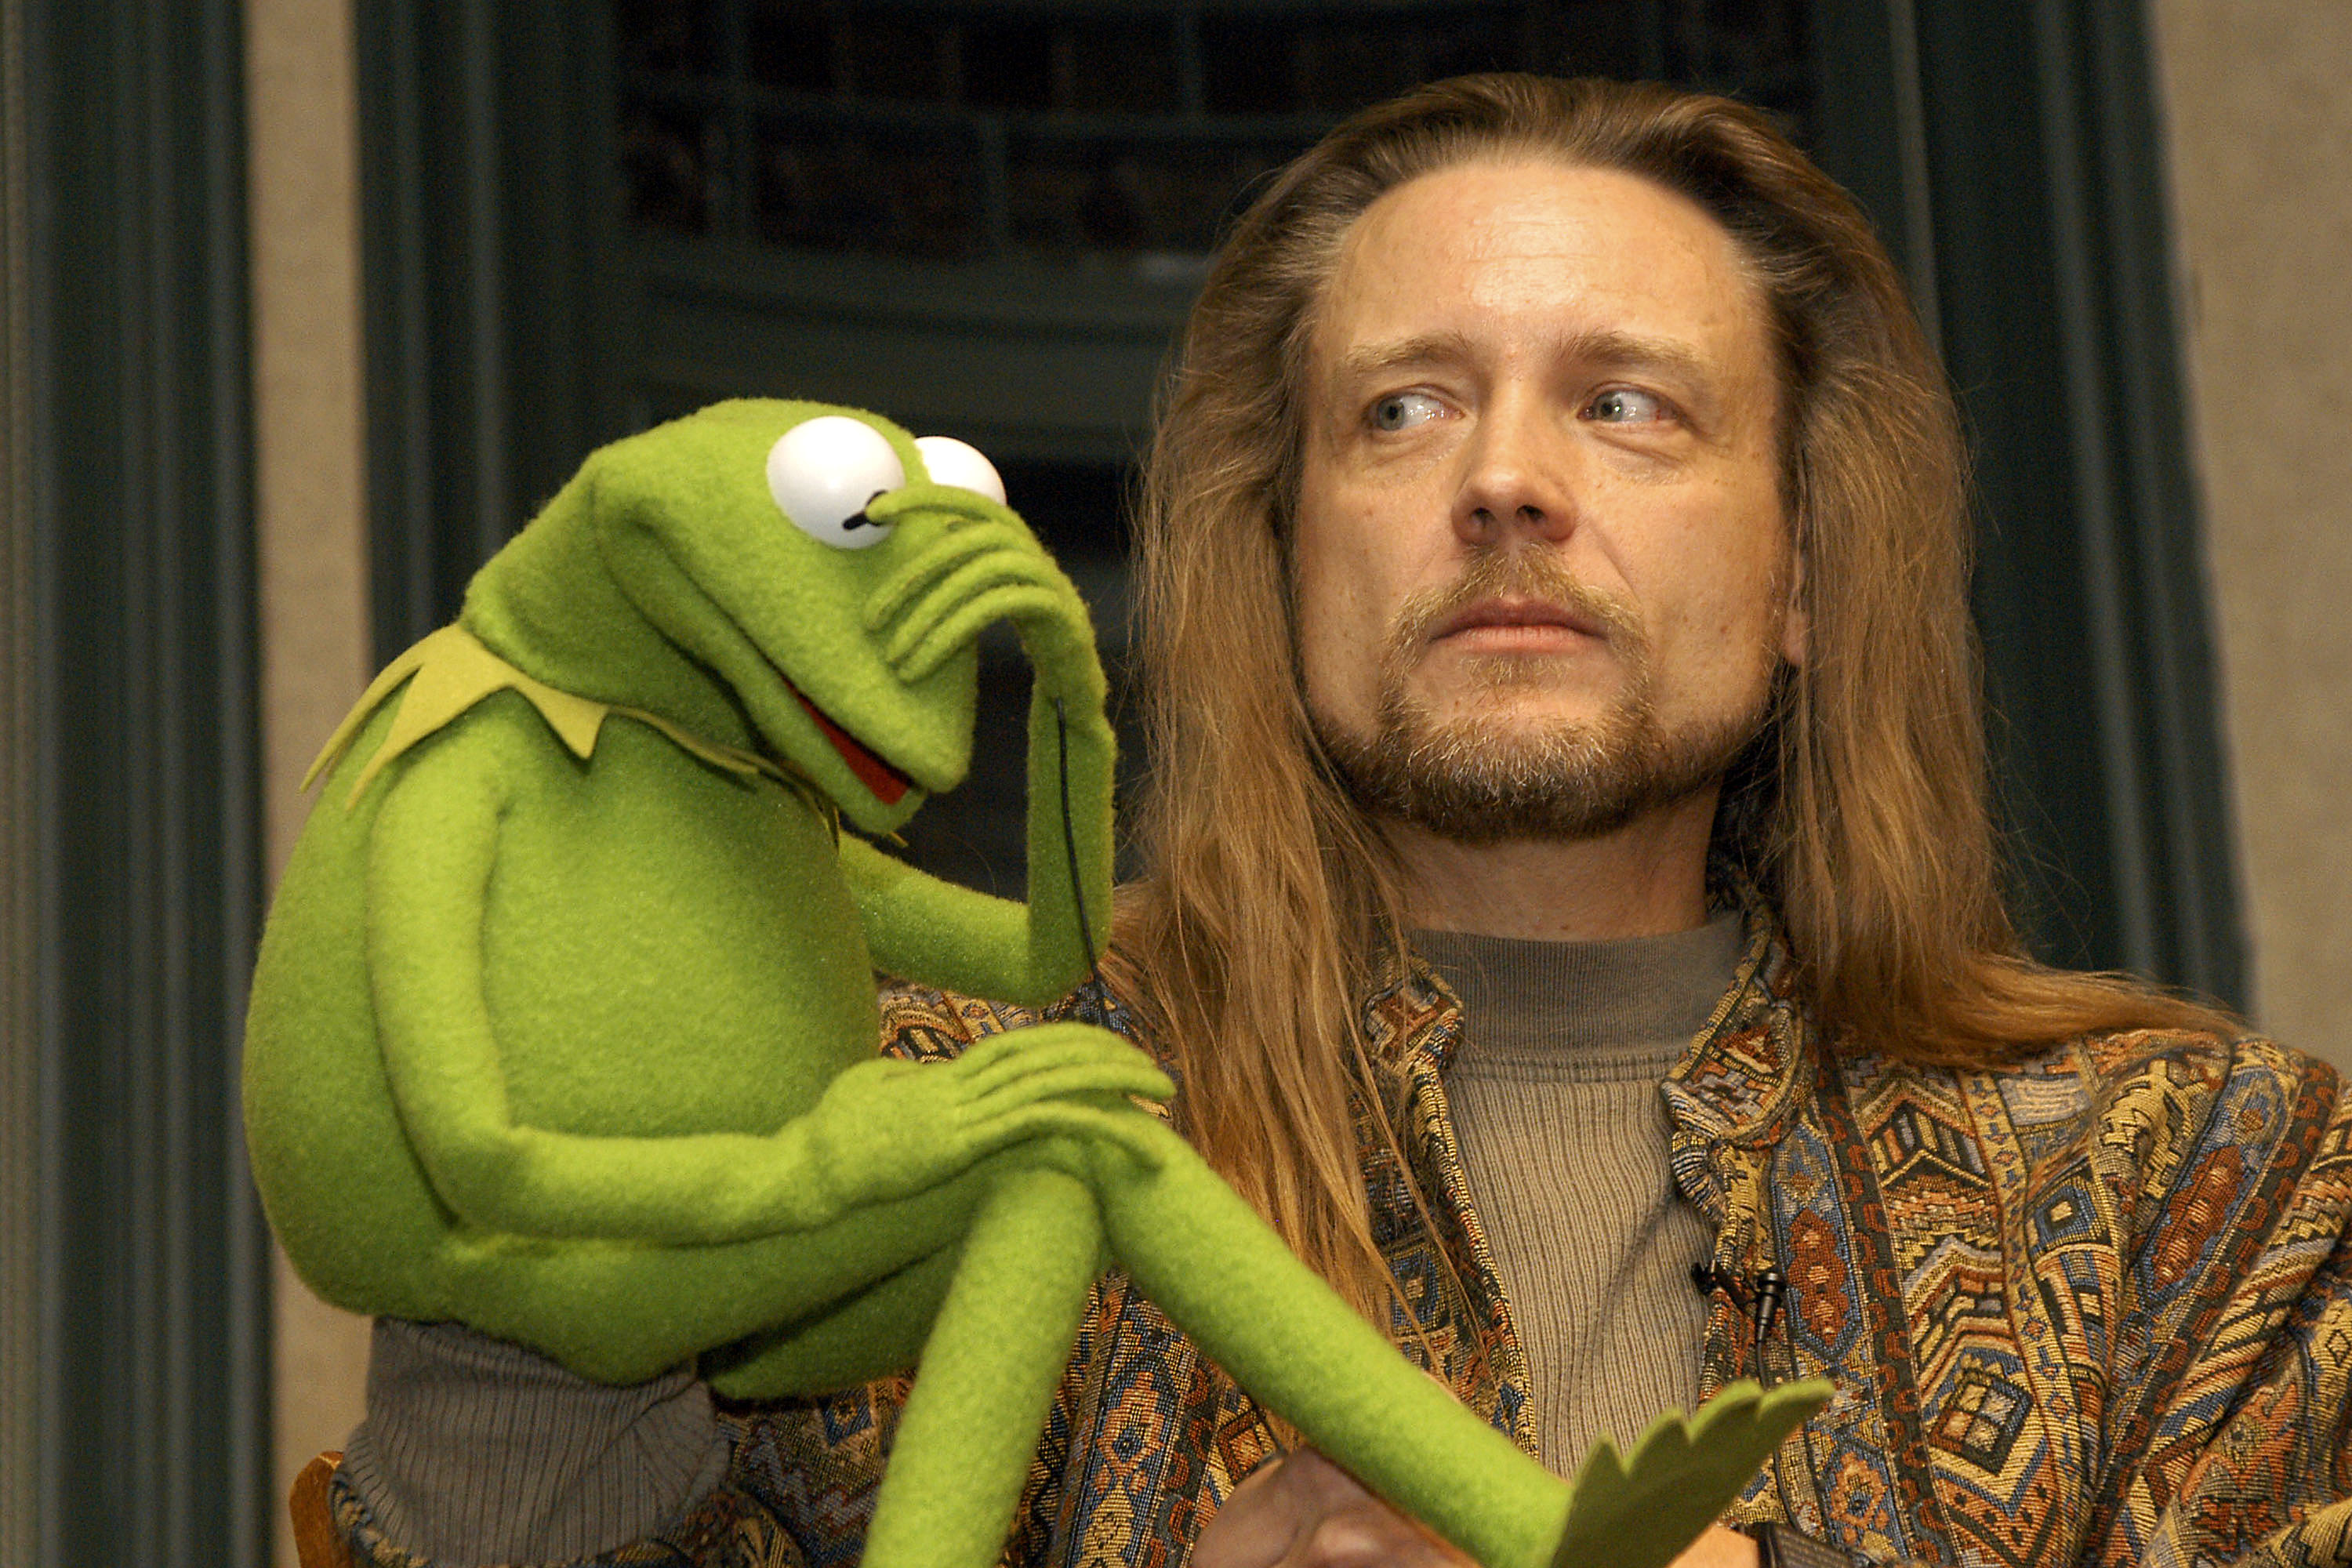 Muppet Kermit the Frog and his operator Steve Whitmire take questions from the audience November 14, 2003, at Barnes &amp; Noble Union Square in New York City. - (Lawrence Lucier&mdash;2003 Getty Images)